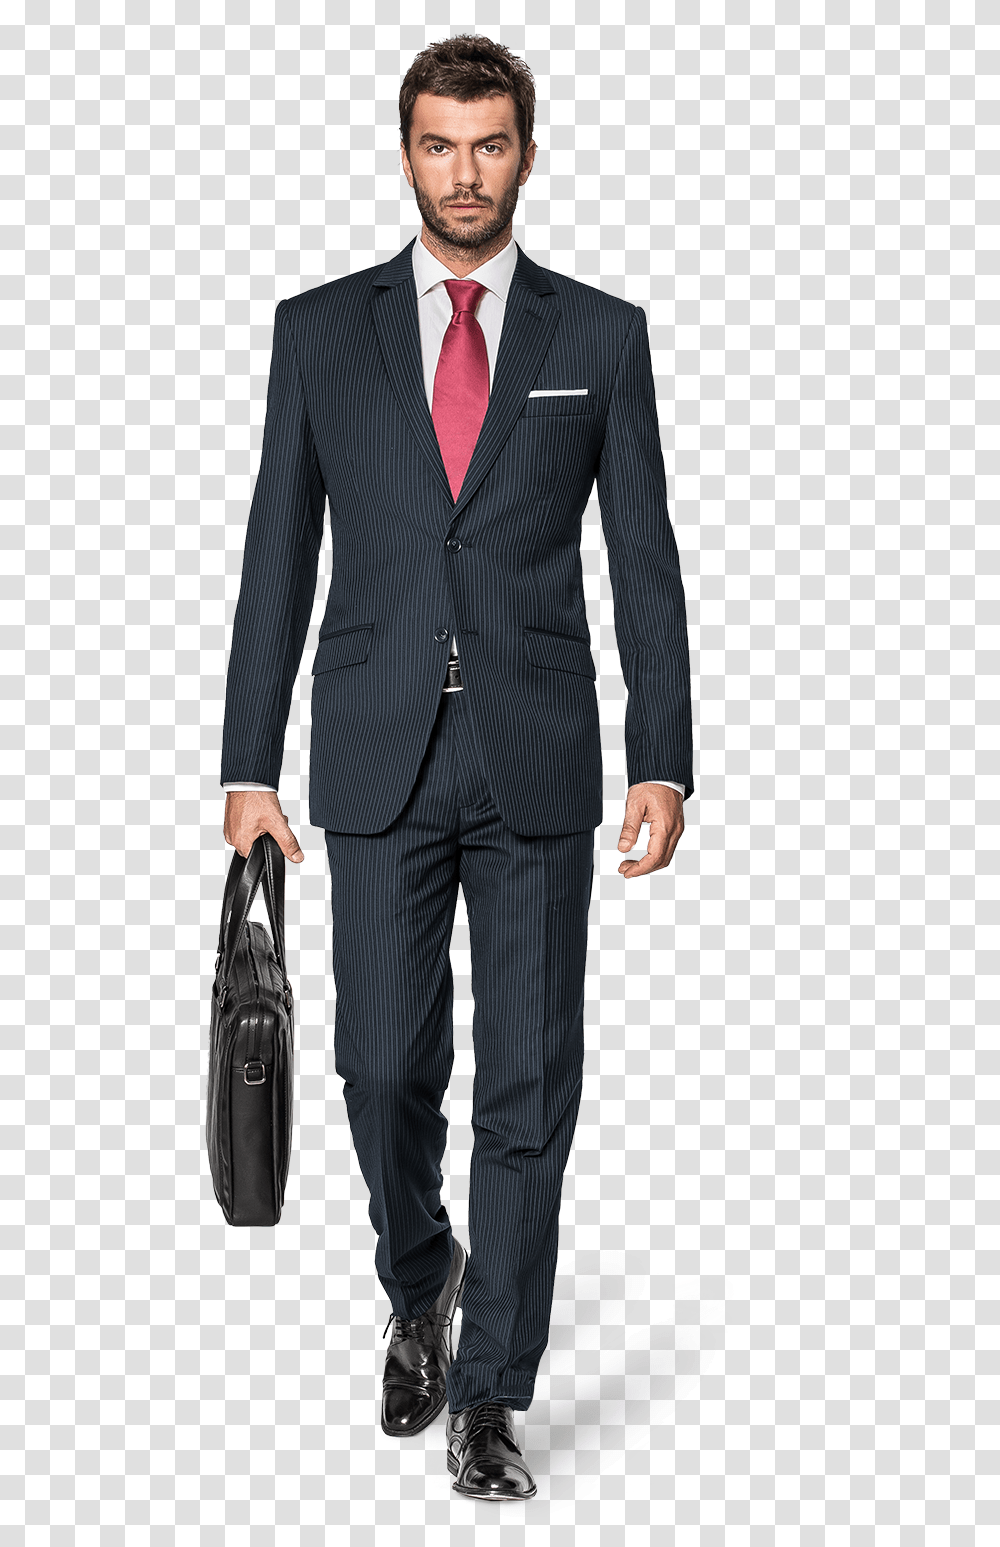 Paul Dano As The Riddler, Suit, Overcoat, Tie Transparent Png